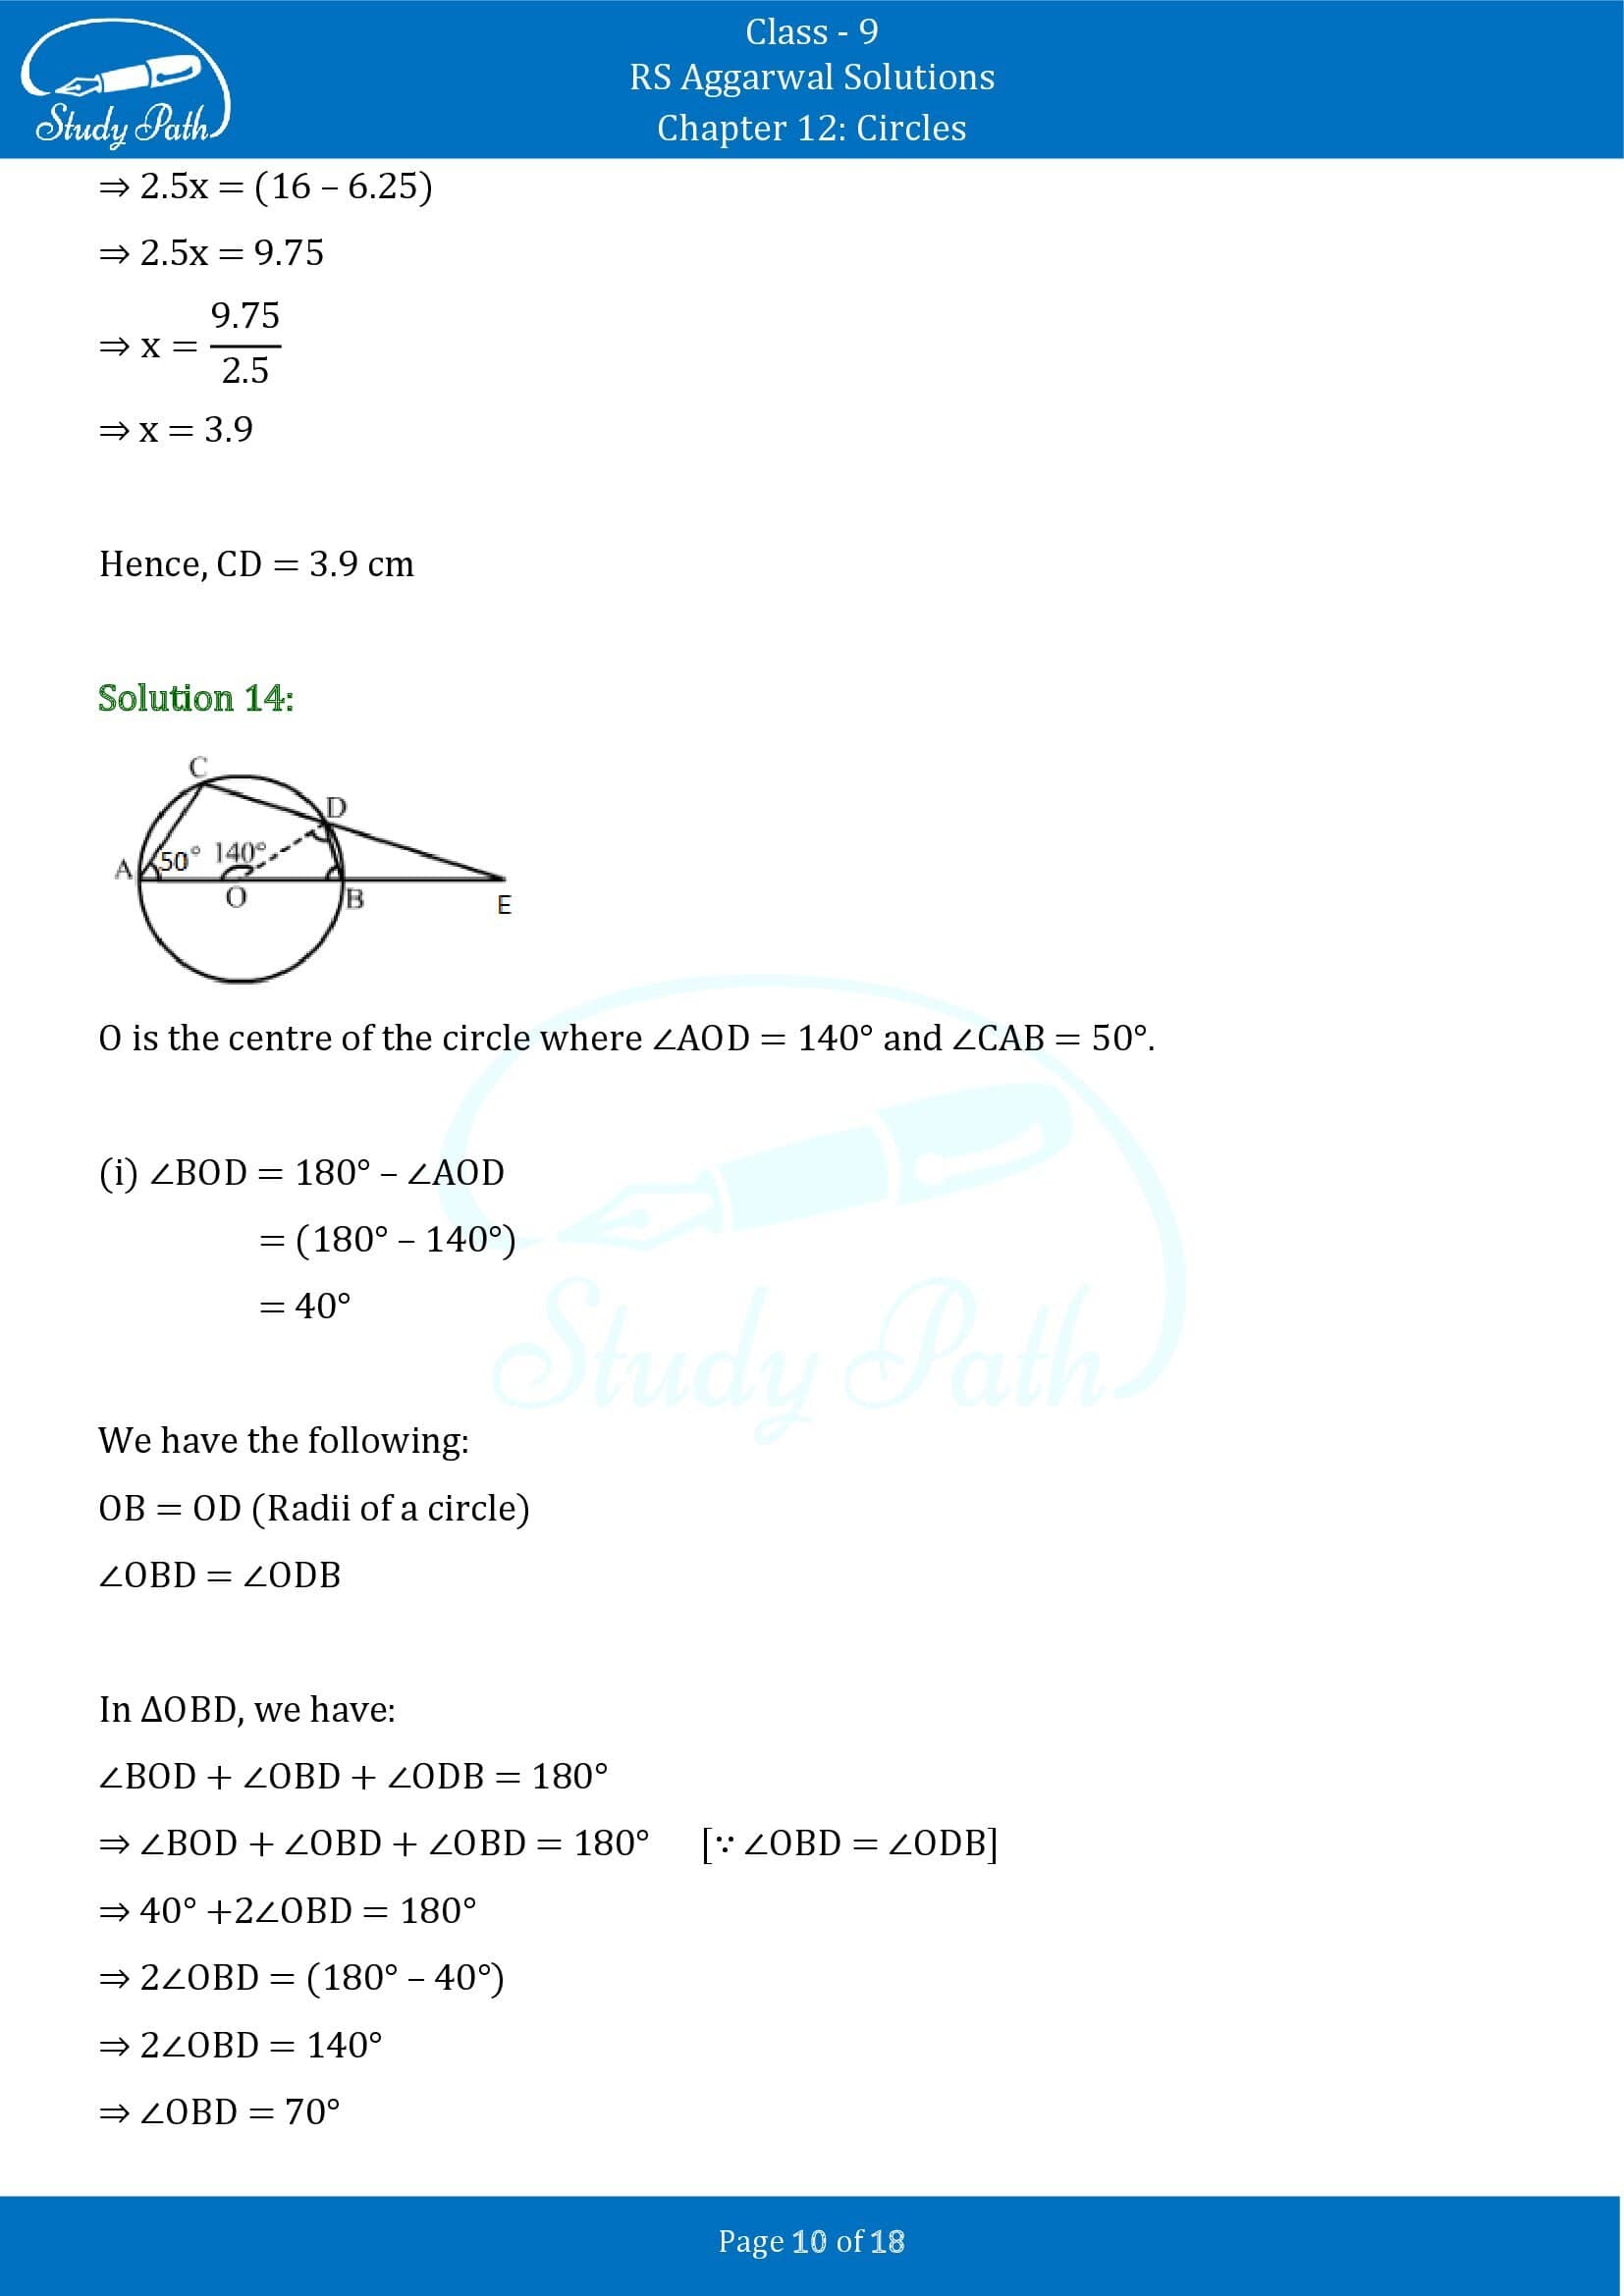 RS Aggarwal Solutions Class 9 Chapter 12 Circles Exercise 12C 00010